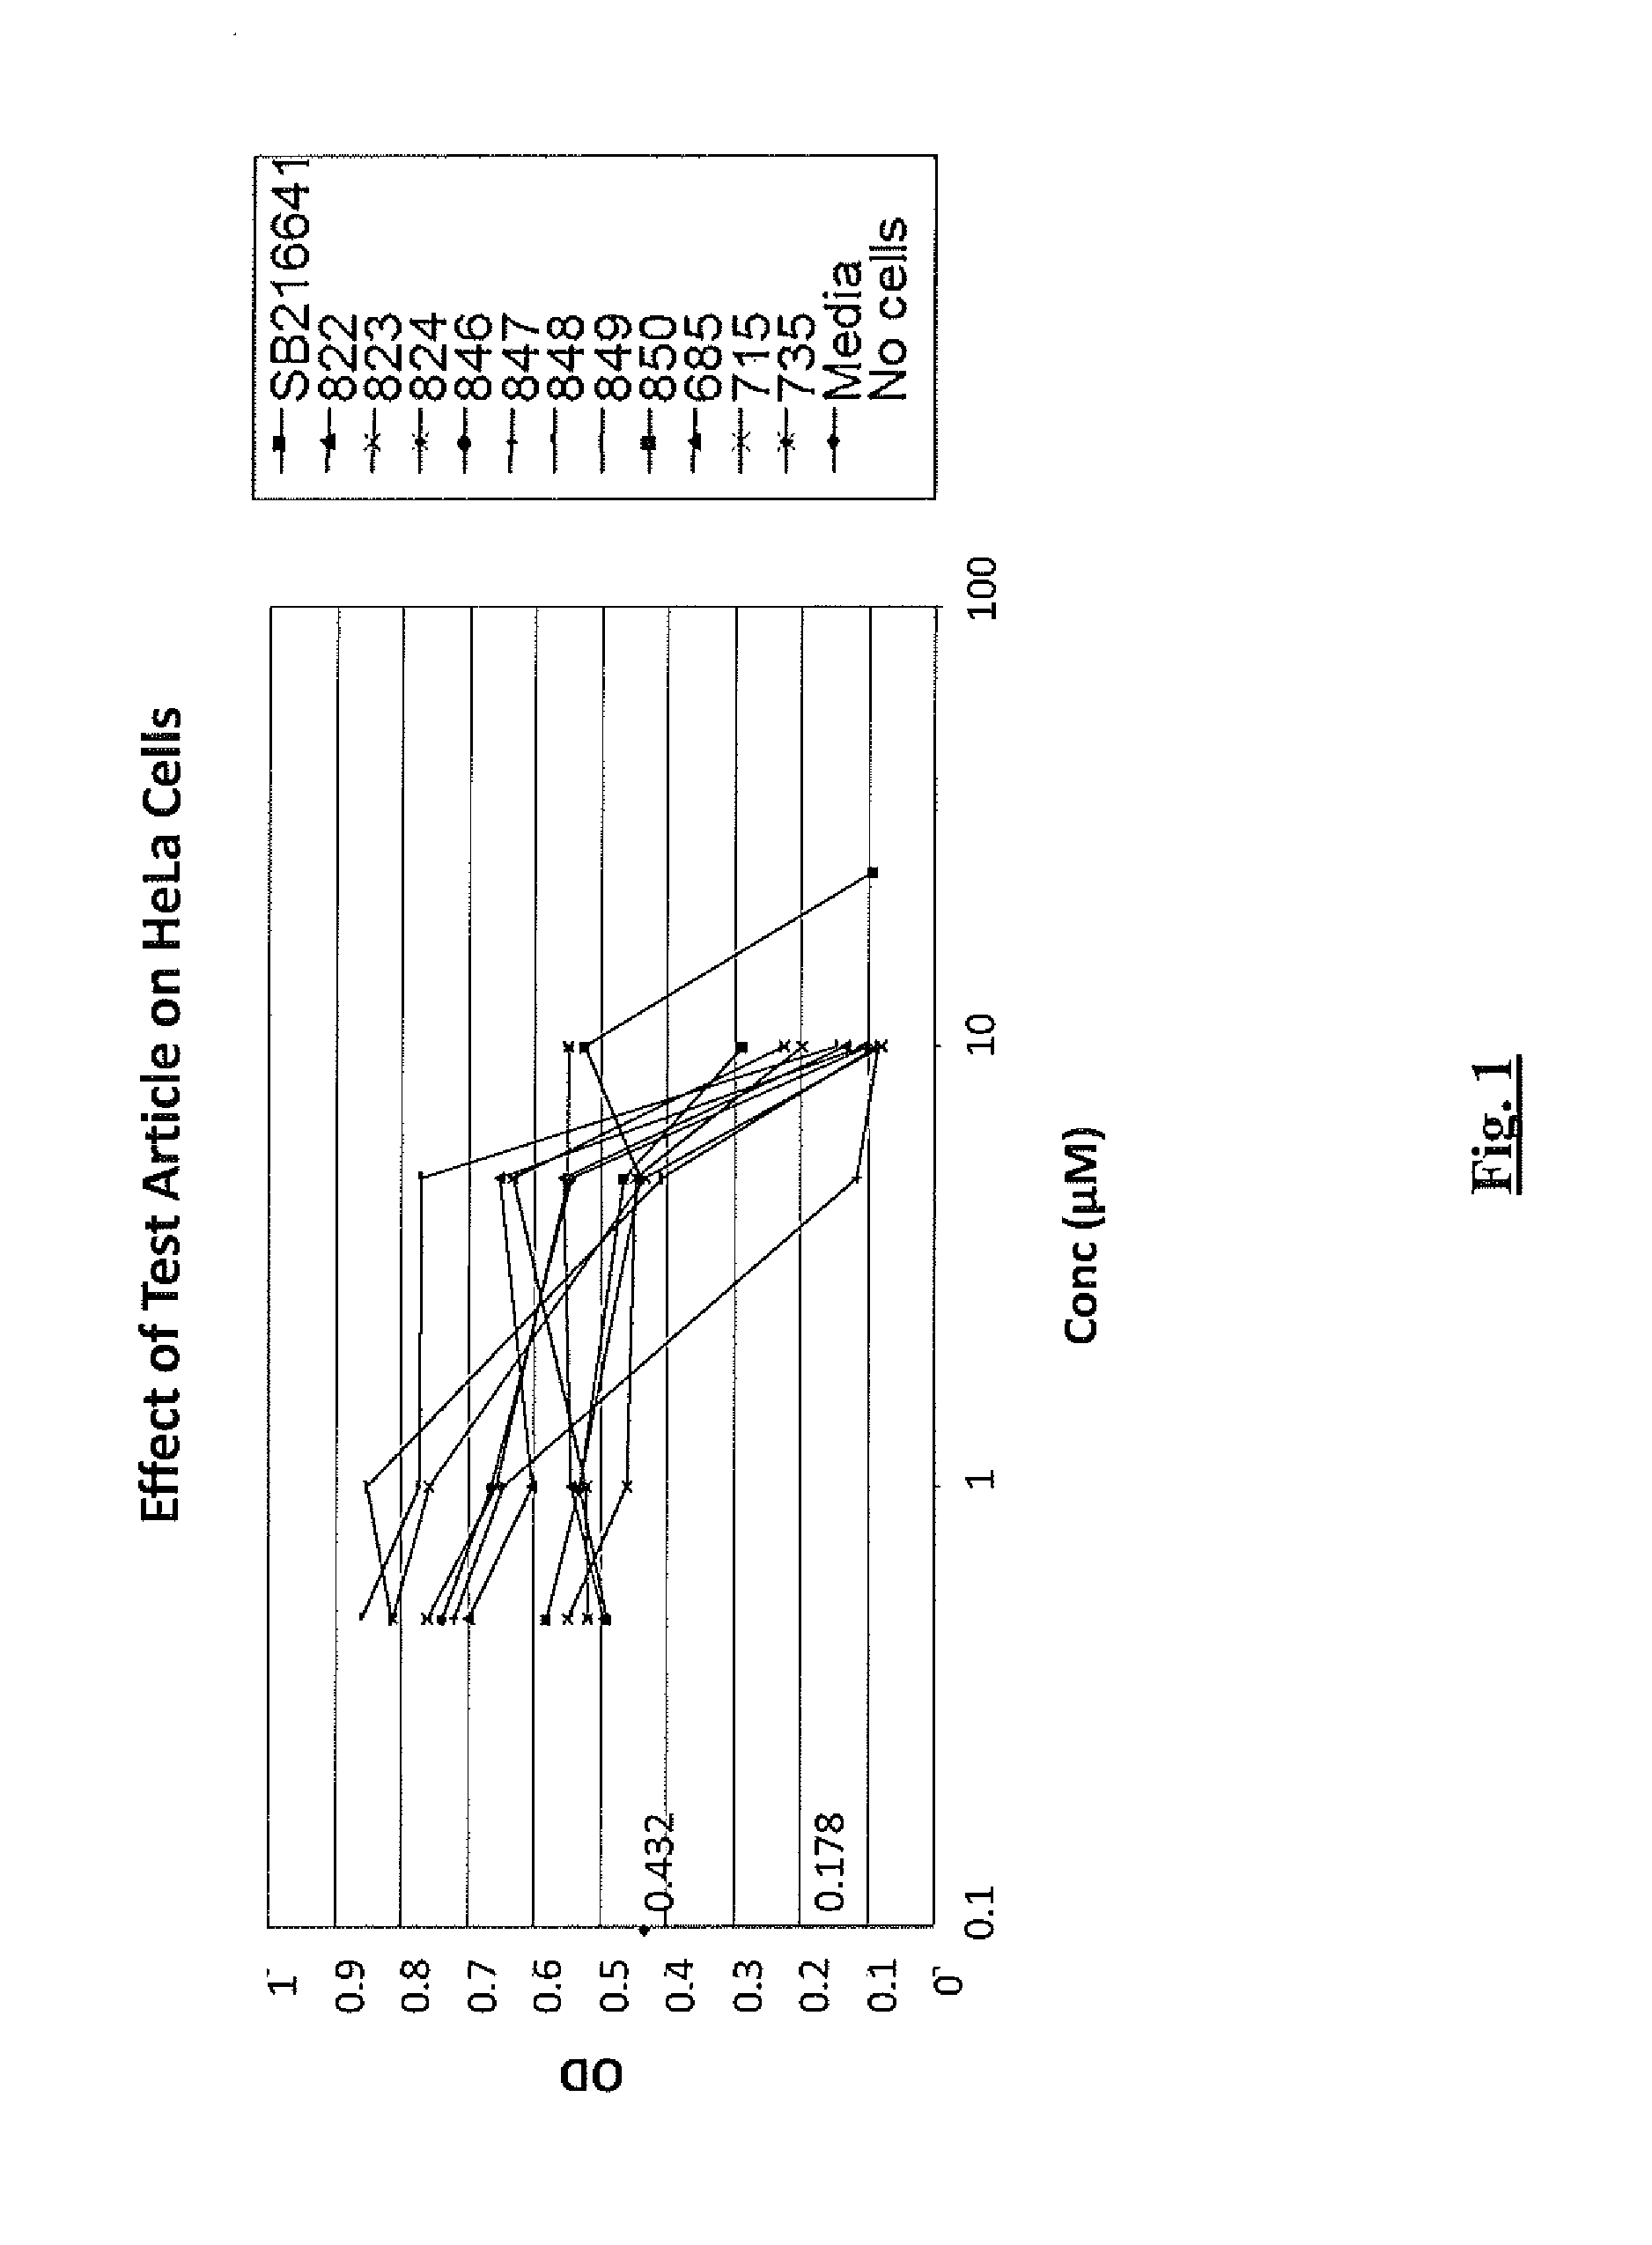 Novel Compositions and Methods of Treating Diseases Using the Same